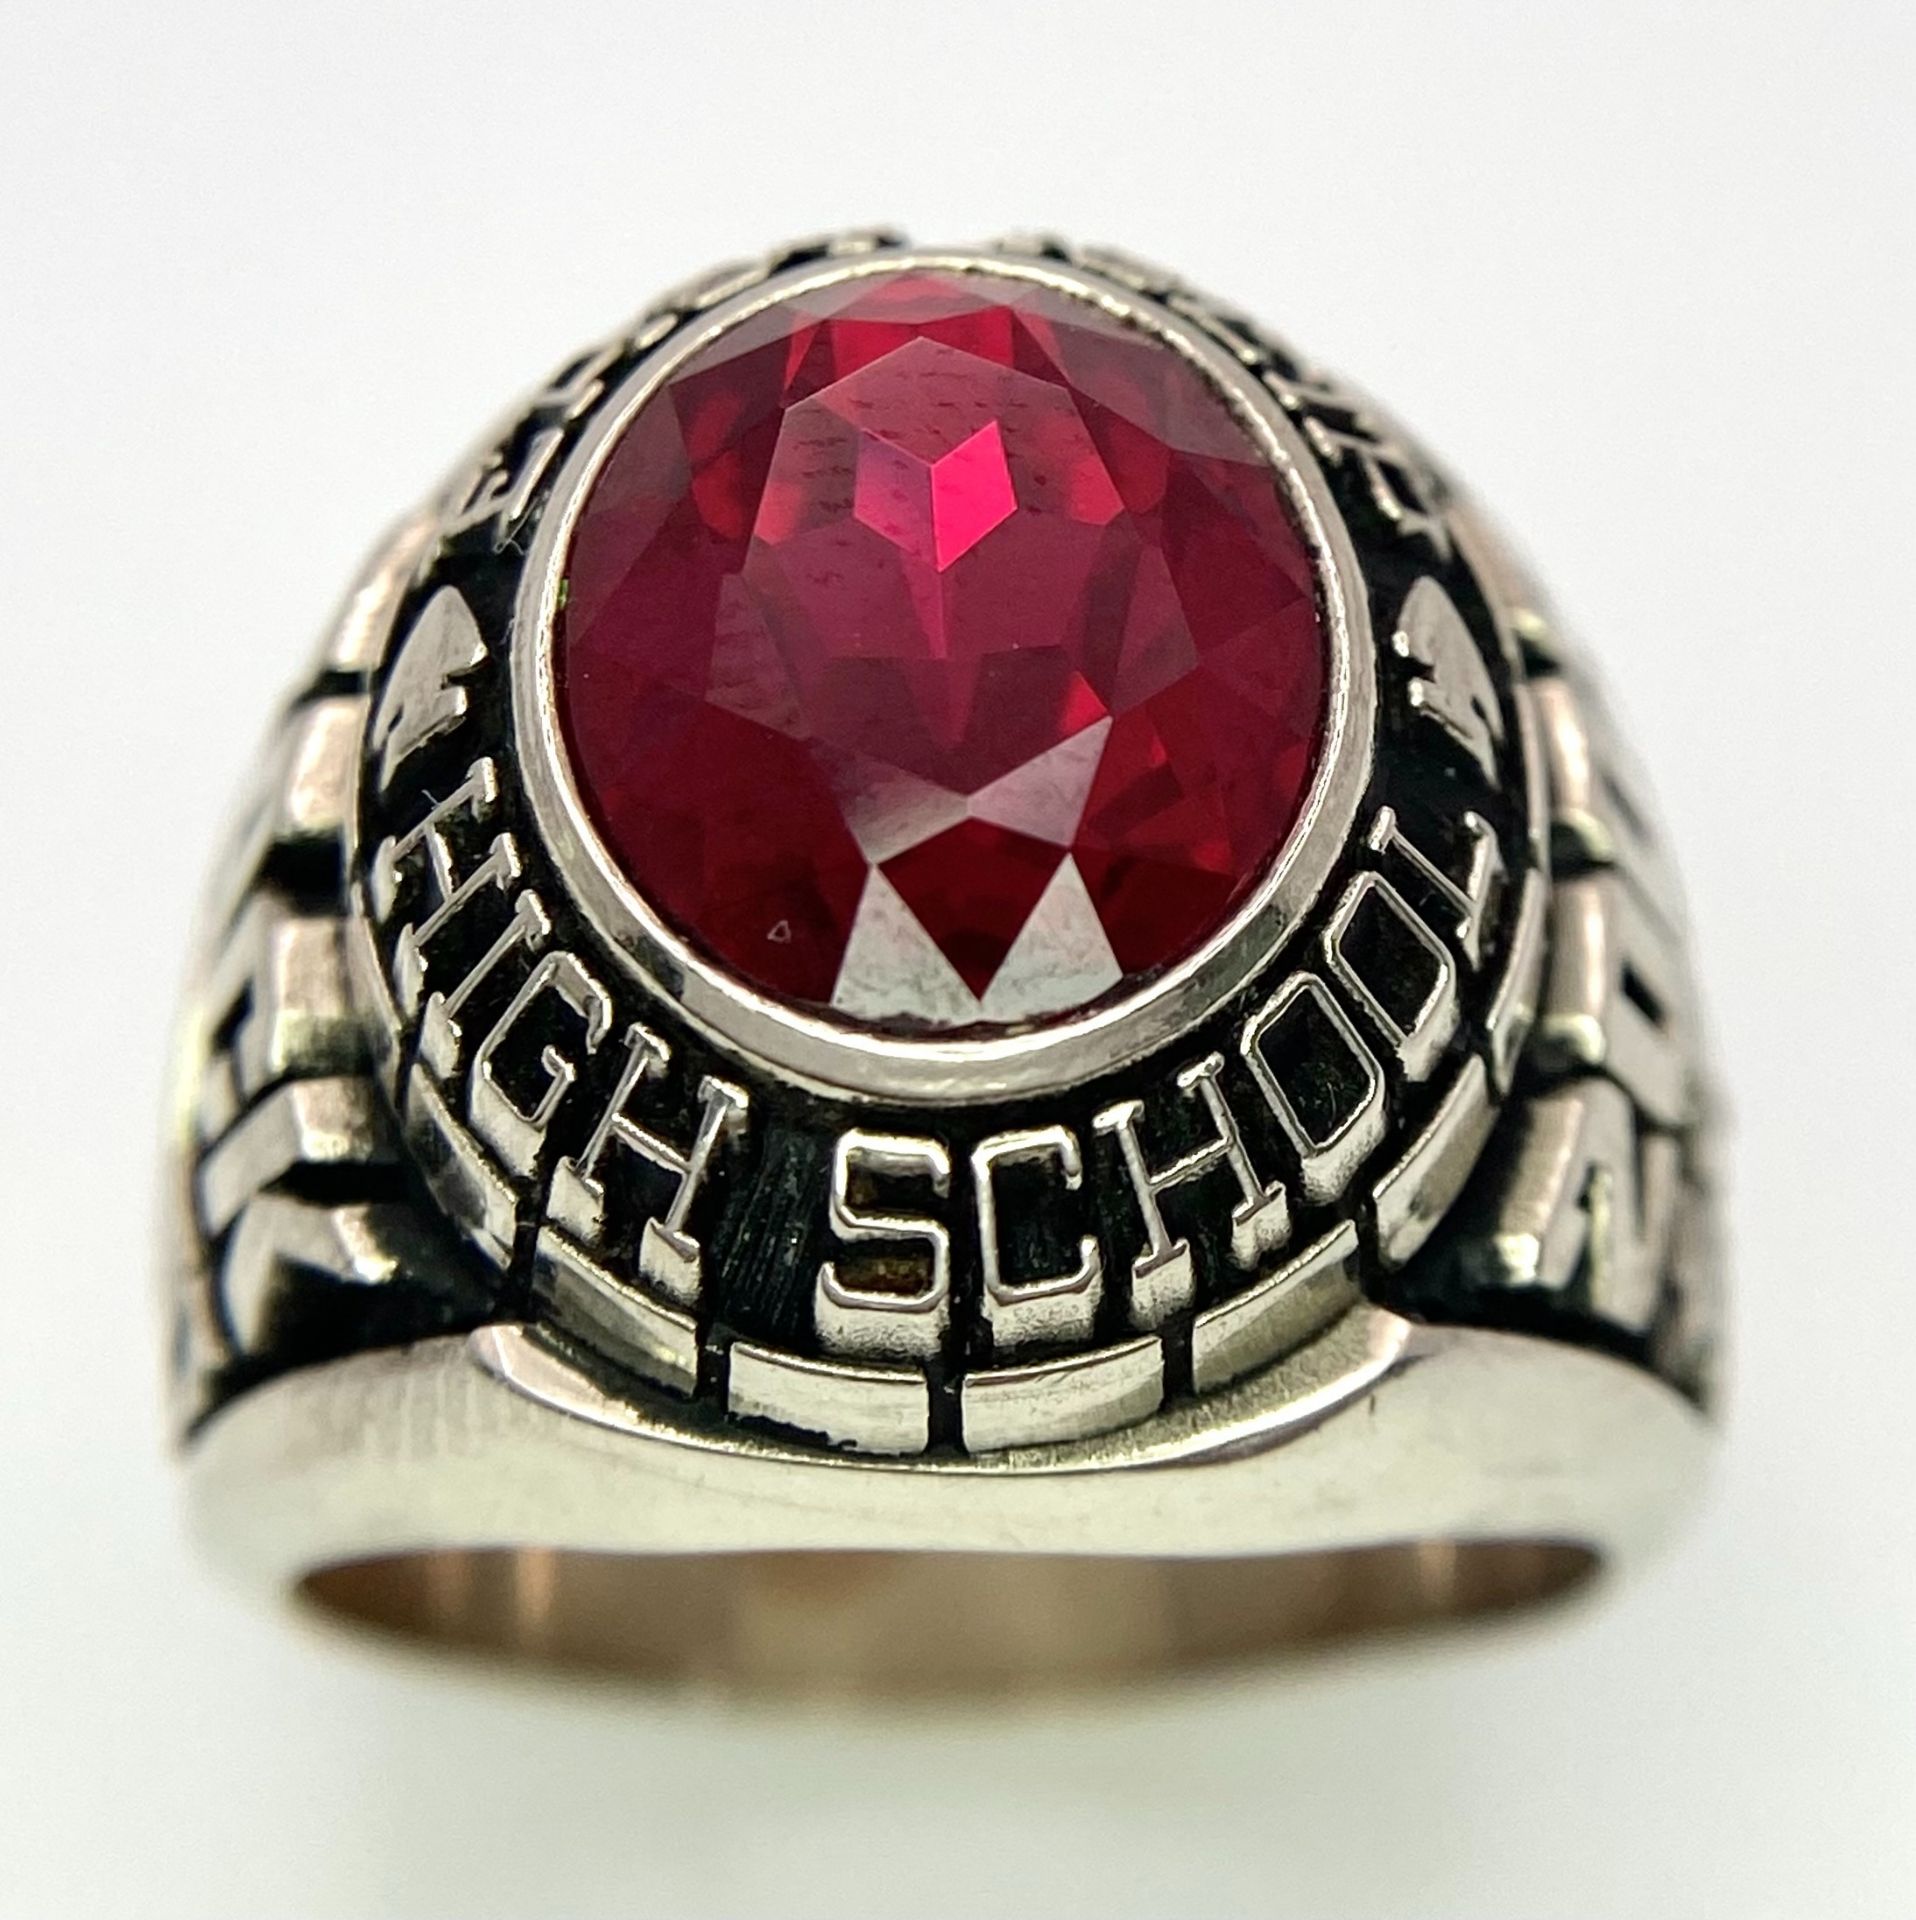 A 10K White Gold and Ruby Gents High School Ring. Size P 1/2. 18g total weight. Ref: 17043